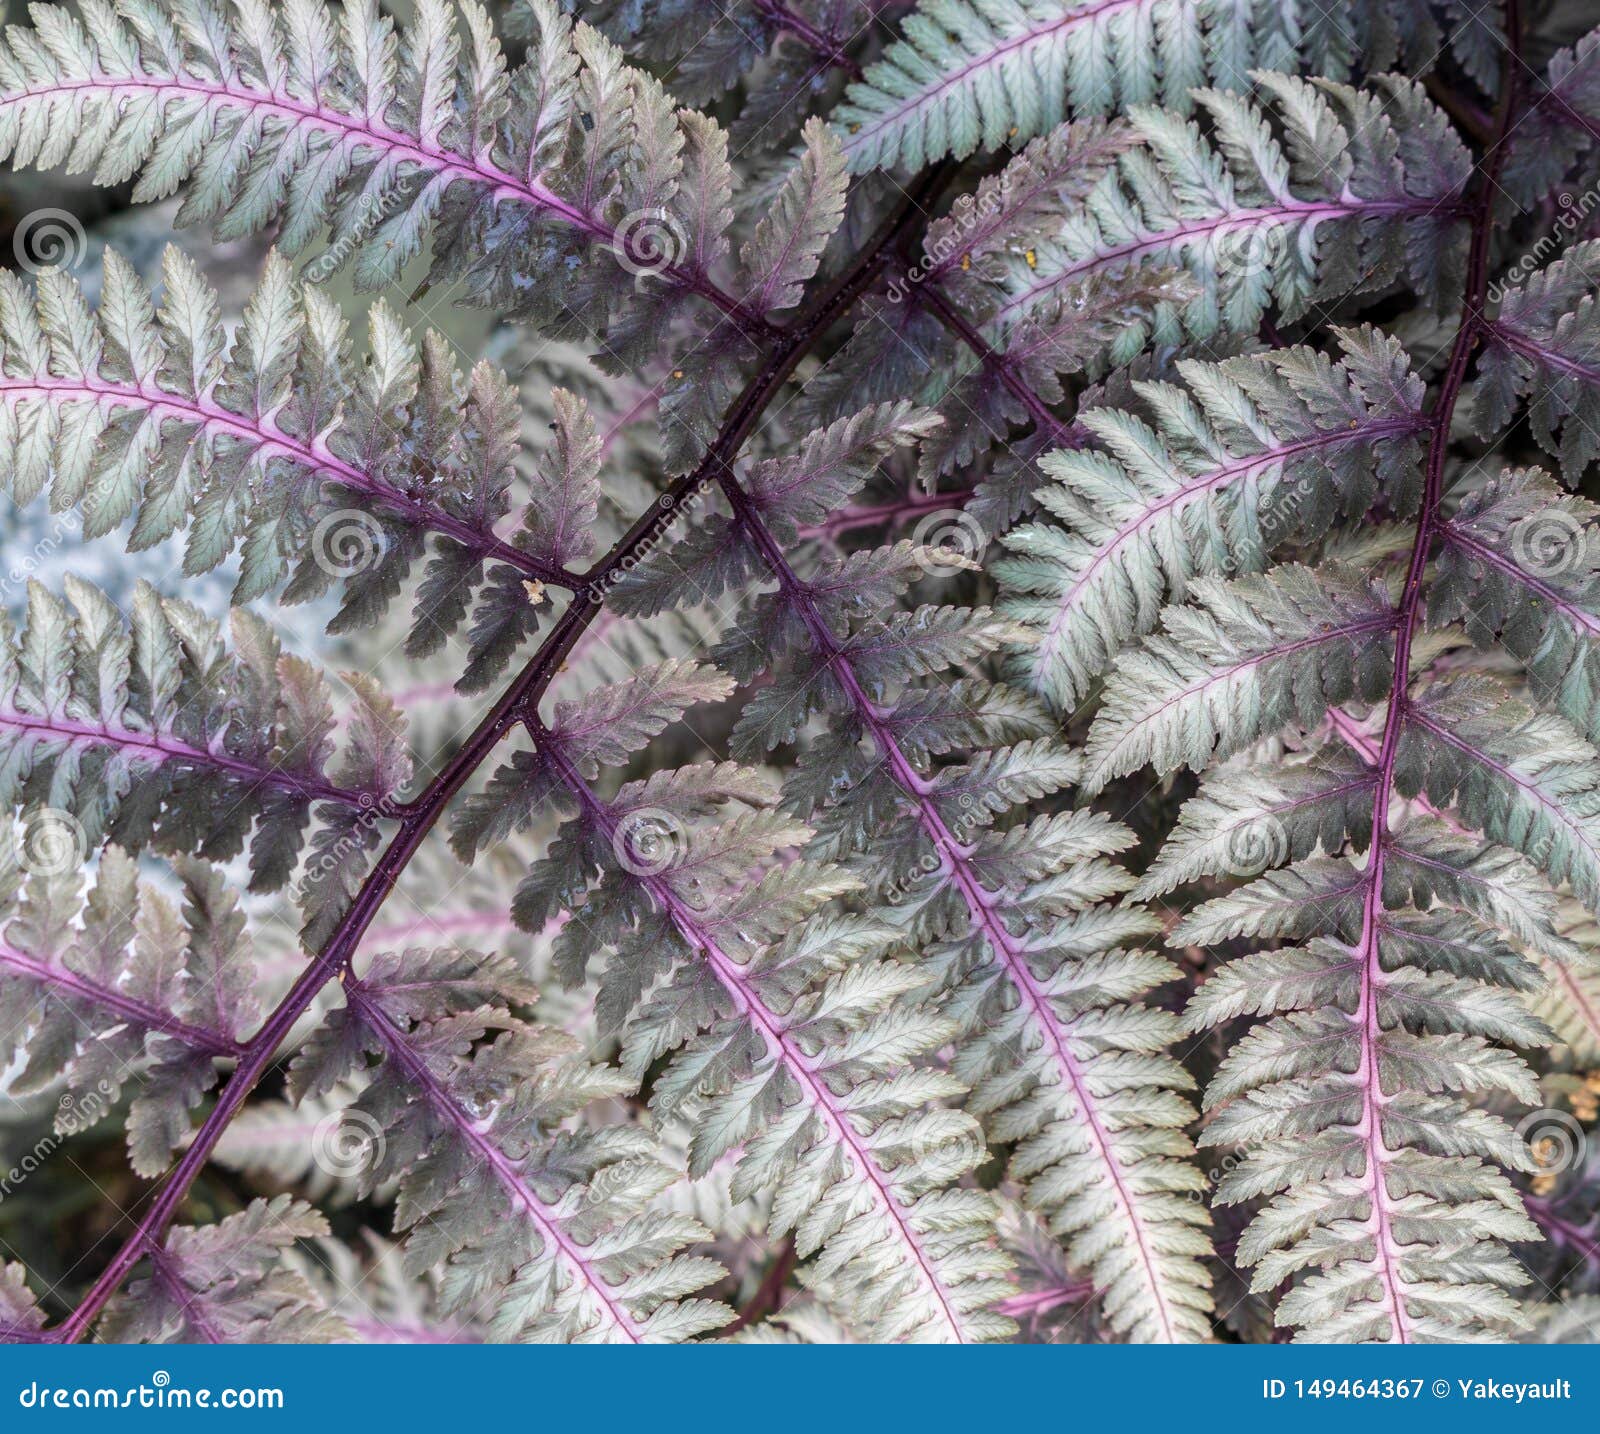 fronds of a japanese painted fern